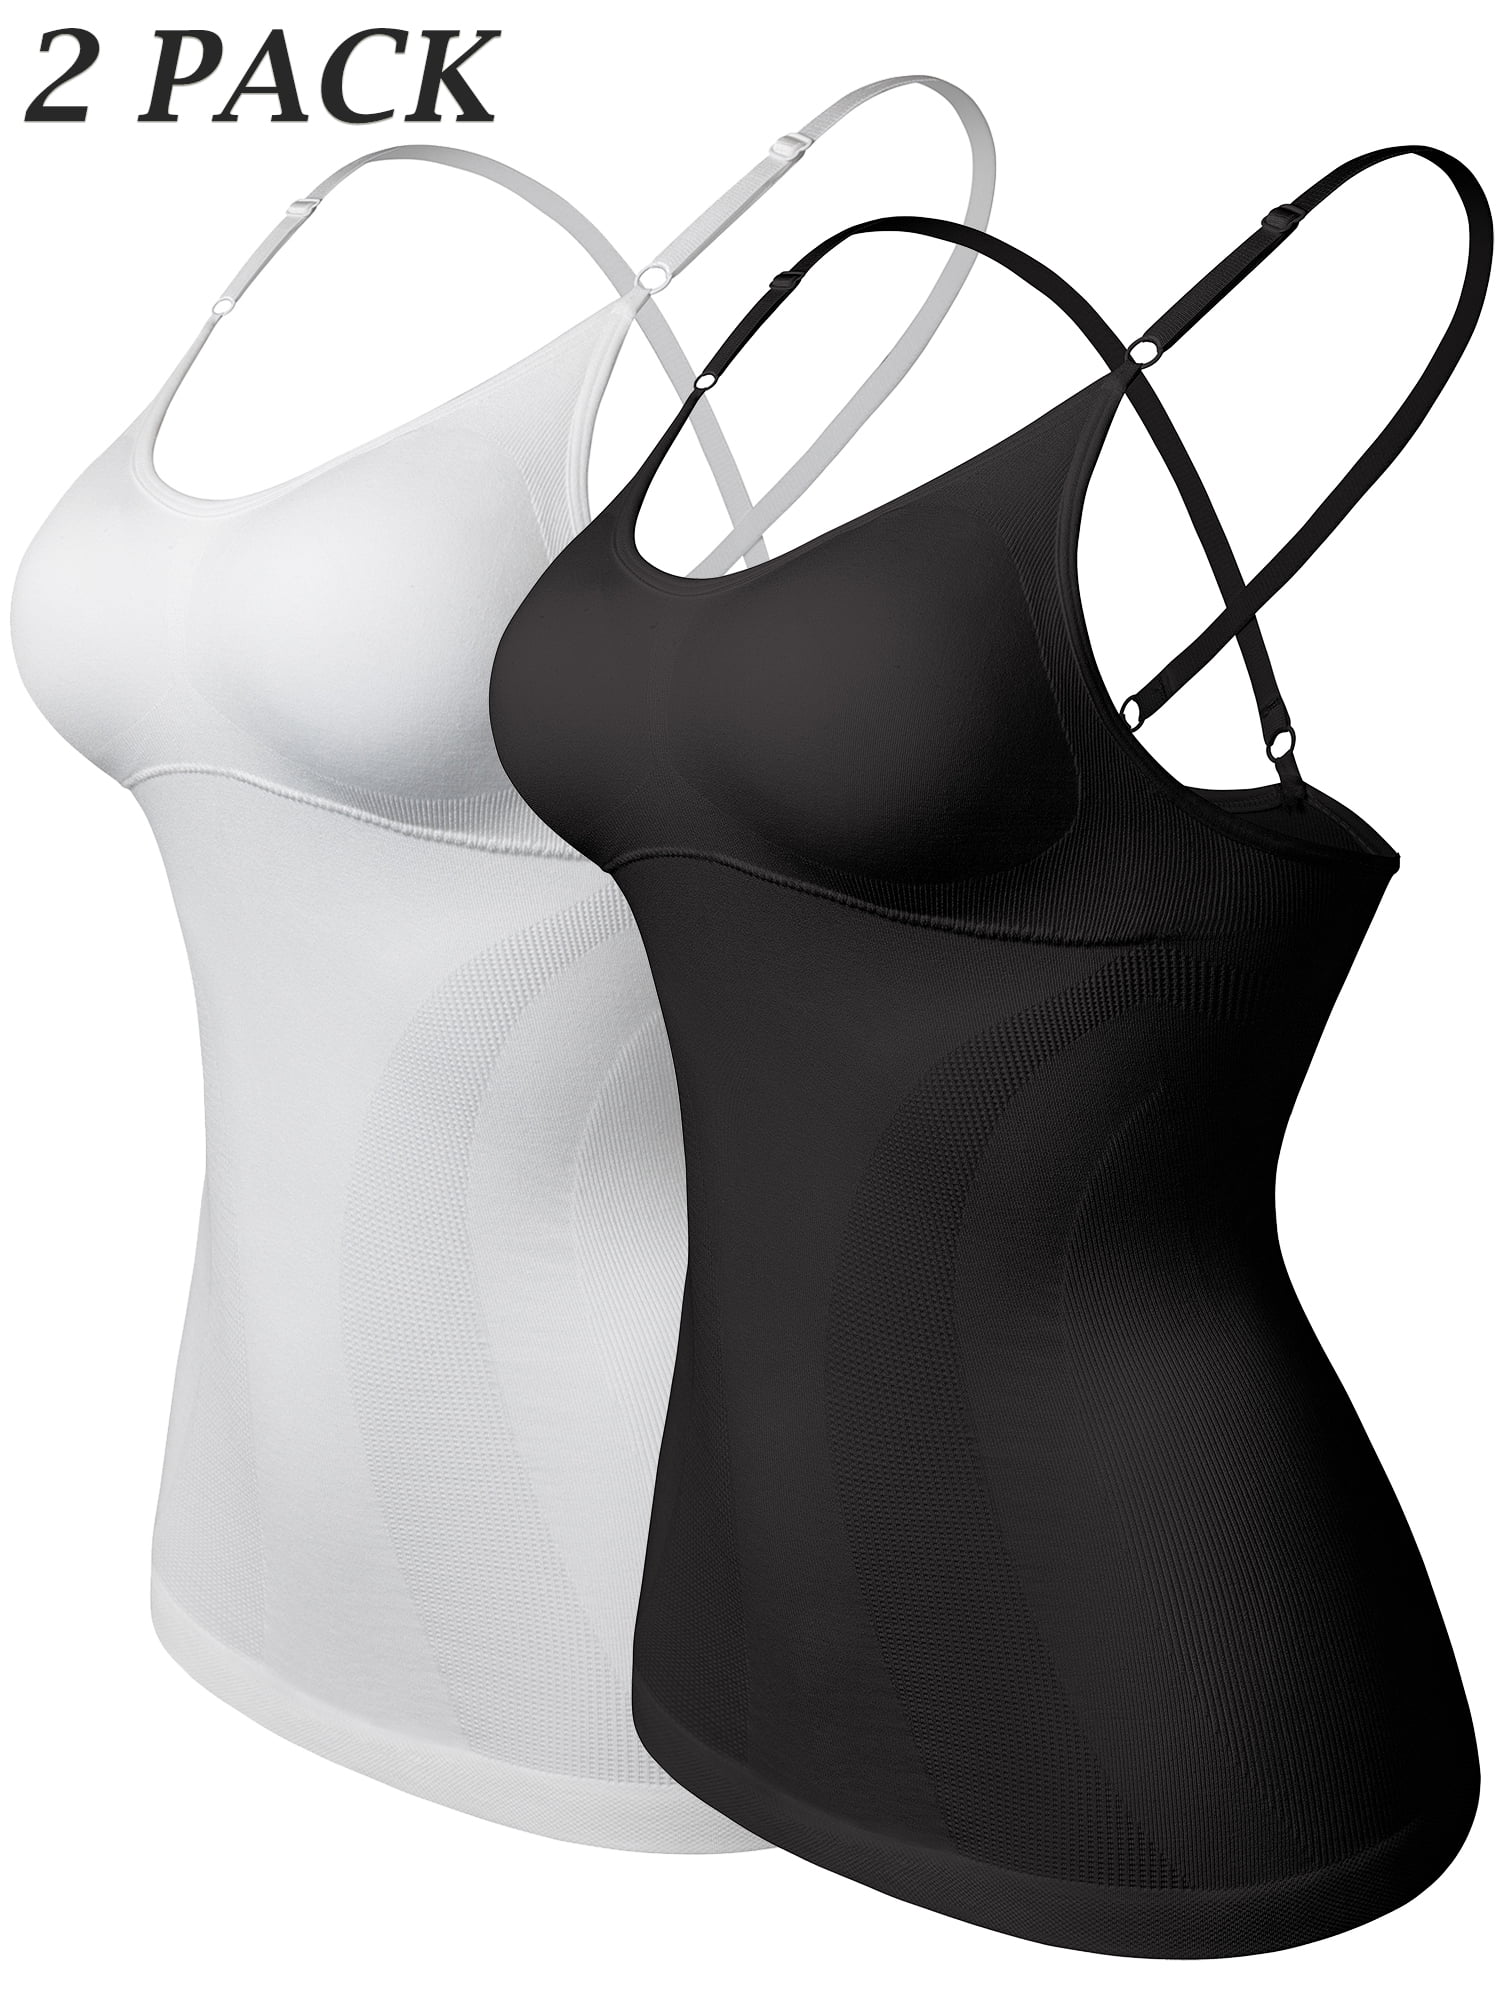 Joyshaper Cami Shaper for Women with Built in Bra Shaping Camisoles for Women Tummy Control Tank Top Underskirts Shapewear